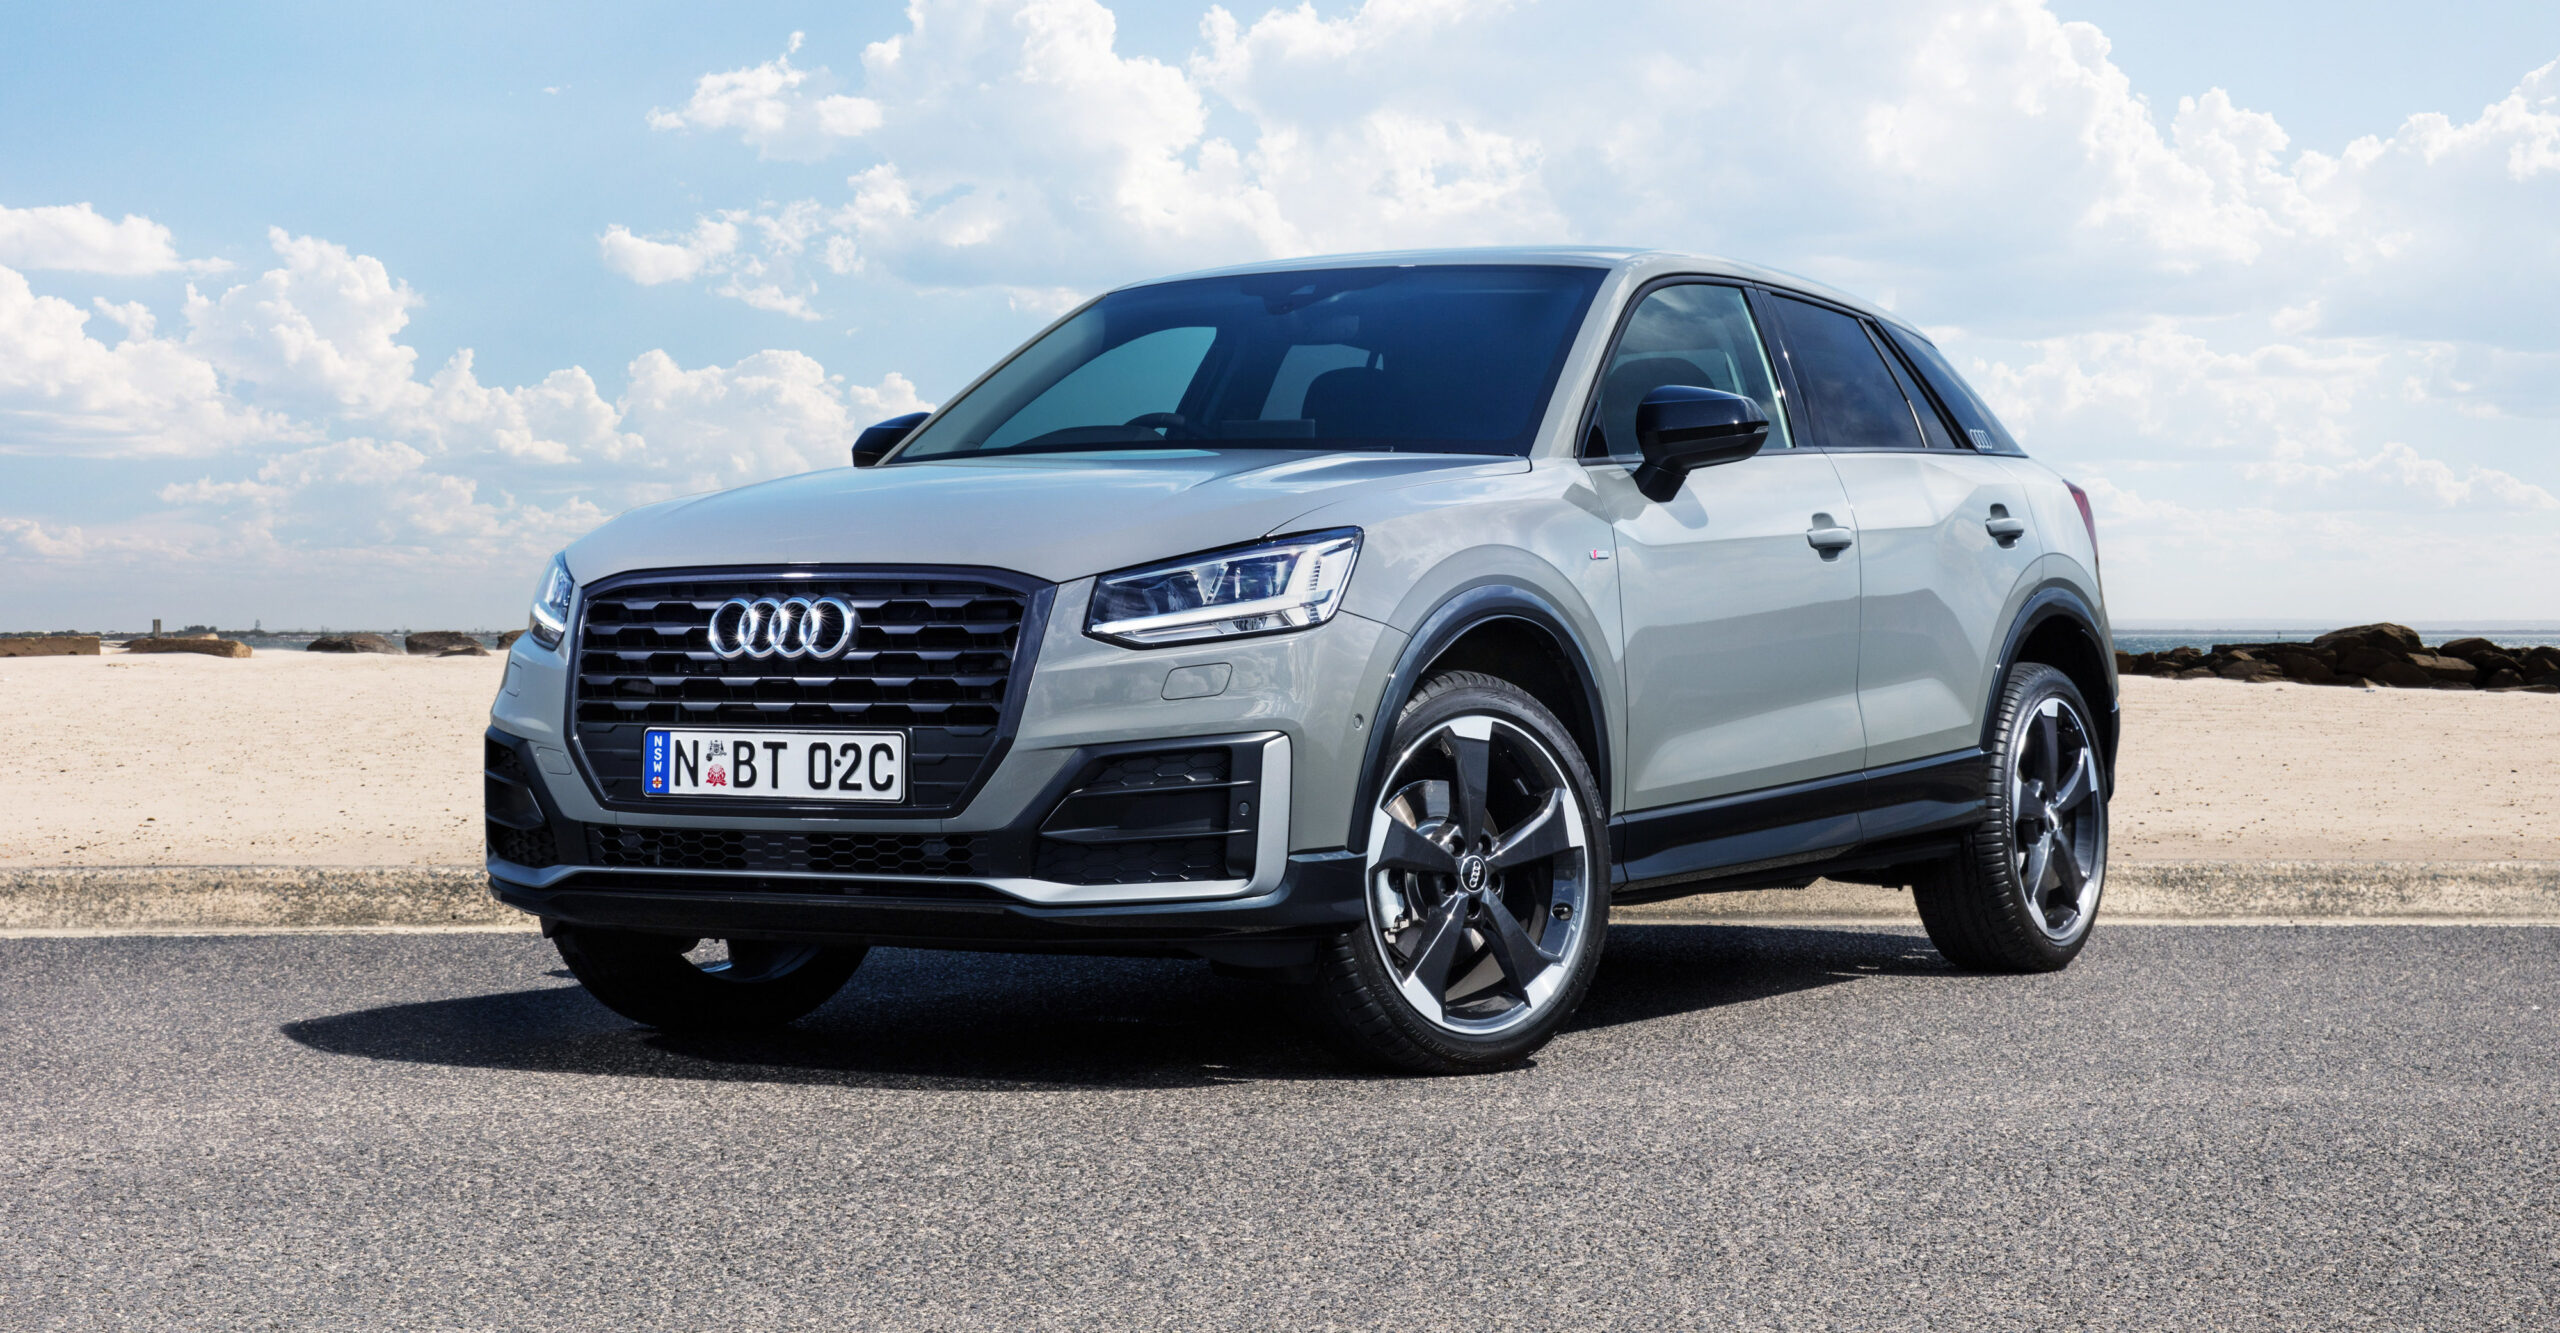 2020 Audi Q2 May Be Small, but It Has Plenty to Recommend It